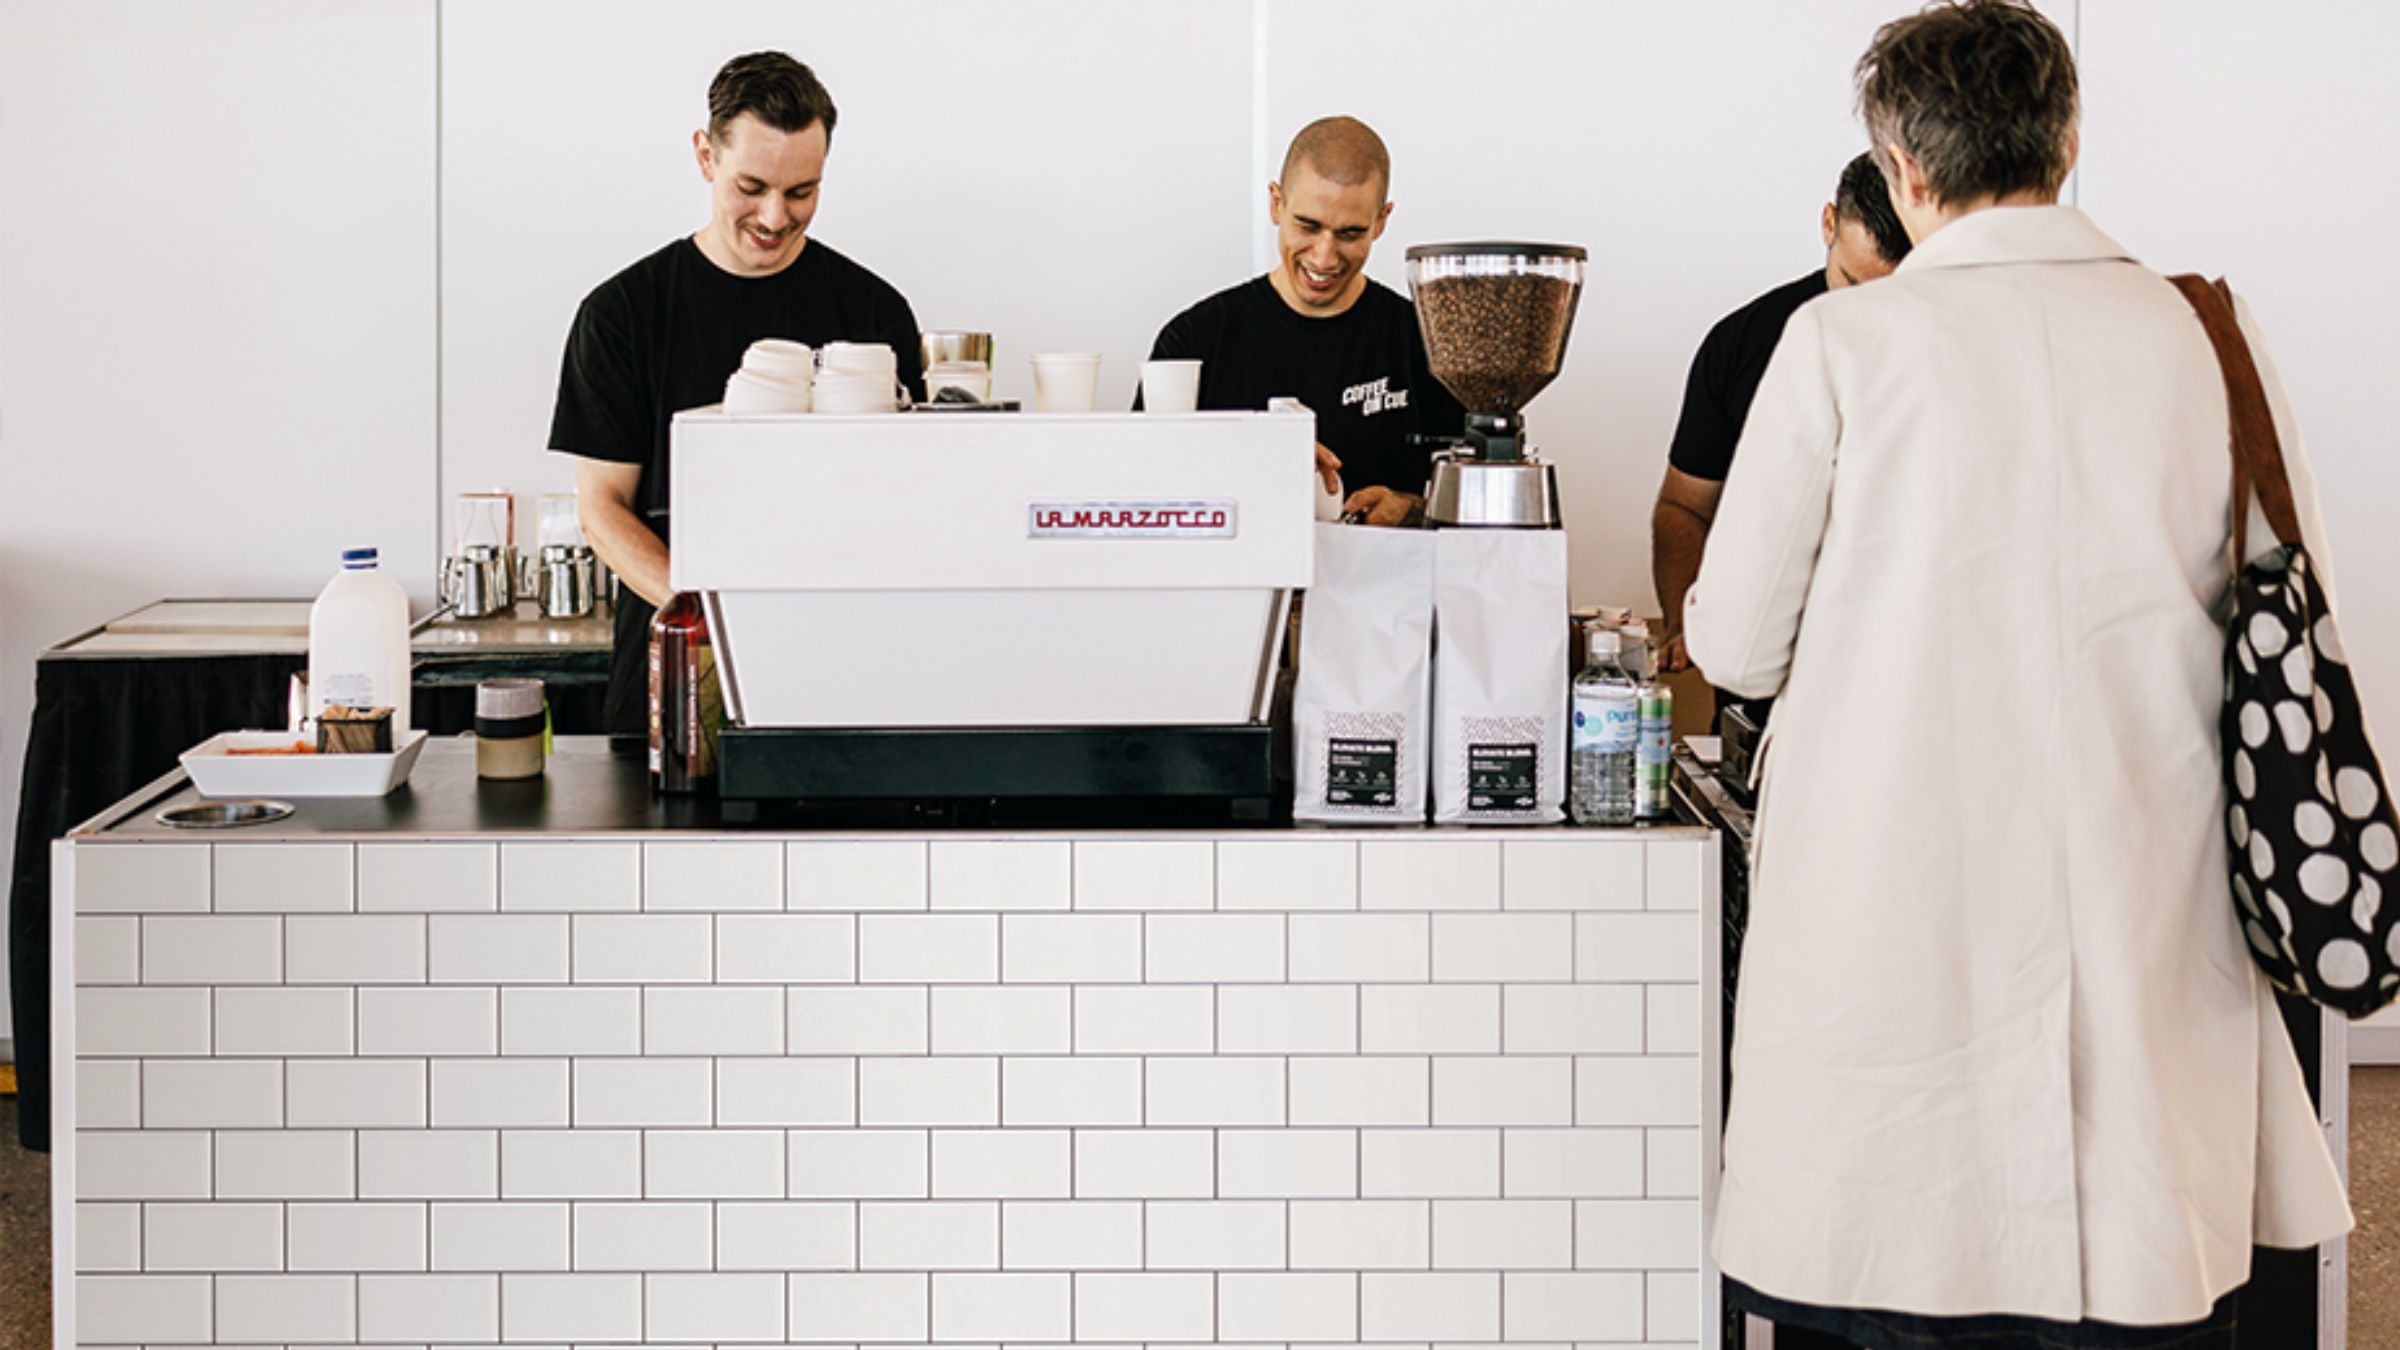 Coffee on Cue baristas serving attendees at Sydney market event